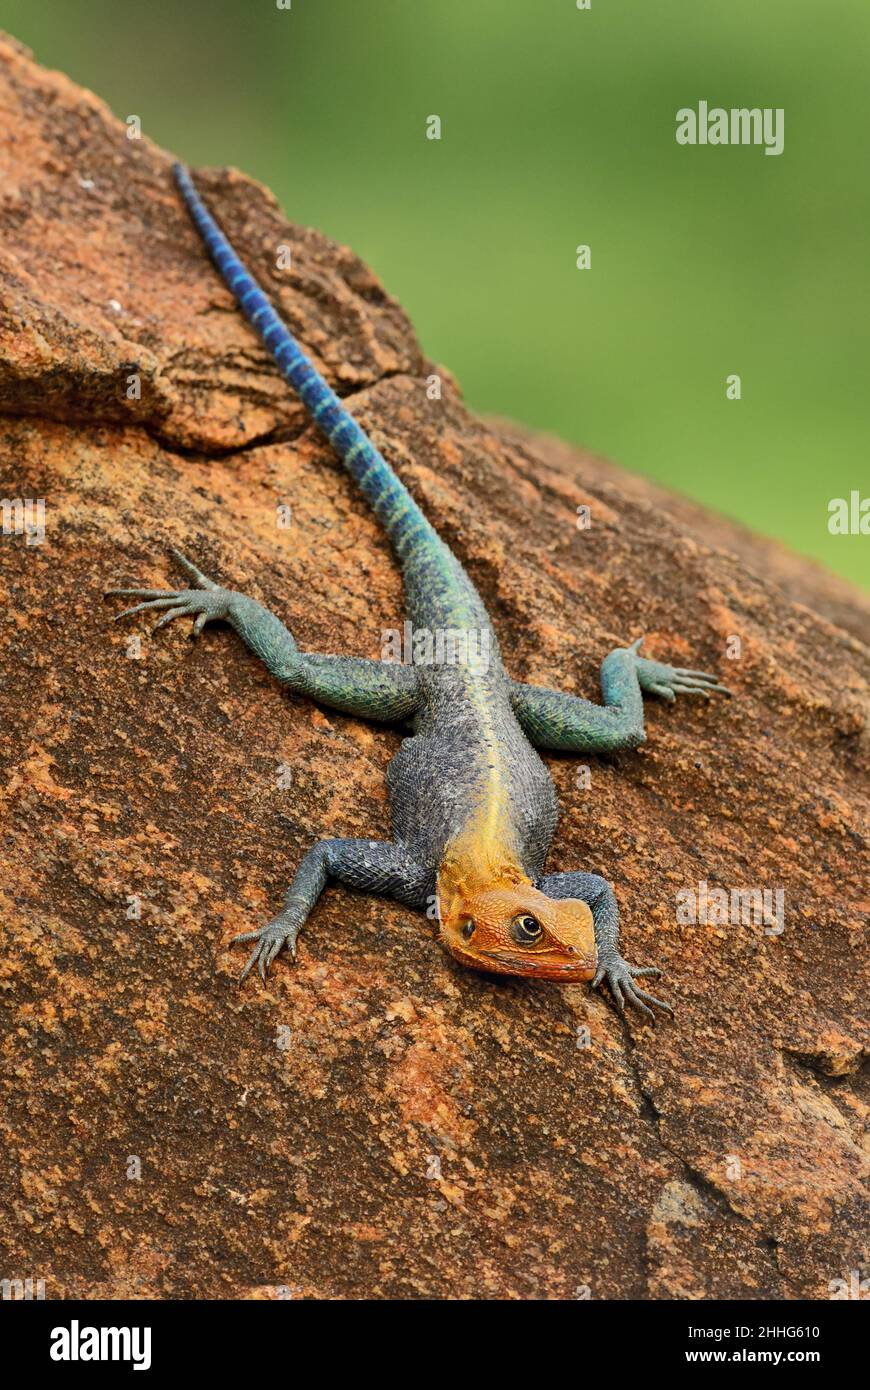 Red-headed Rock Agama - Agama agama, beautiful colored lizard from African gardens and woodlands, Tsavo East, Kenya. Stock Photo